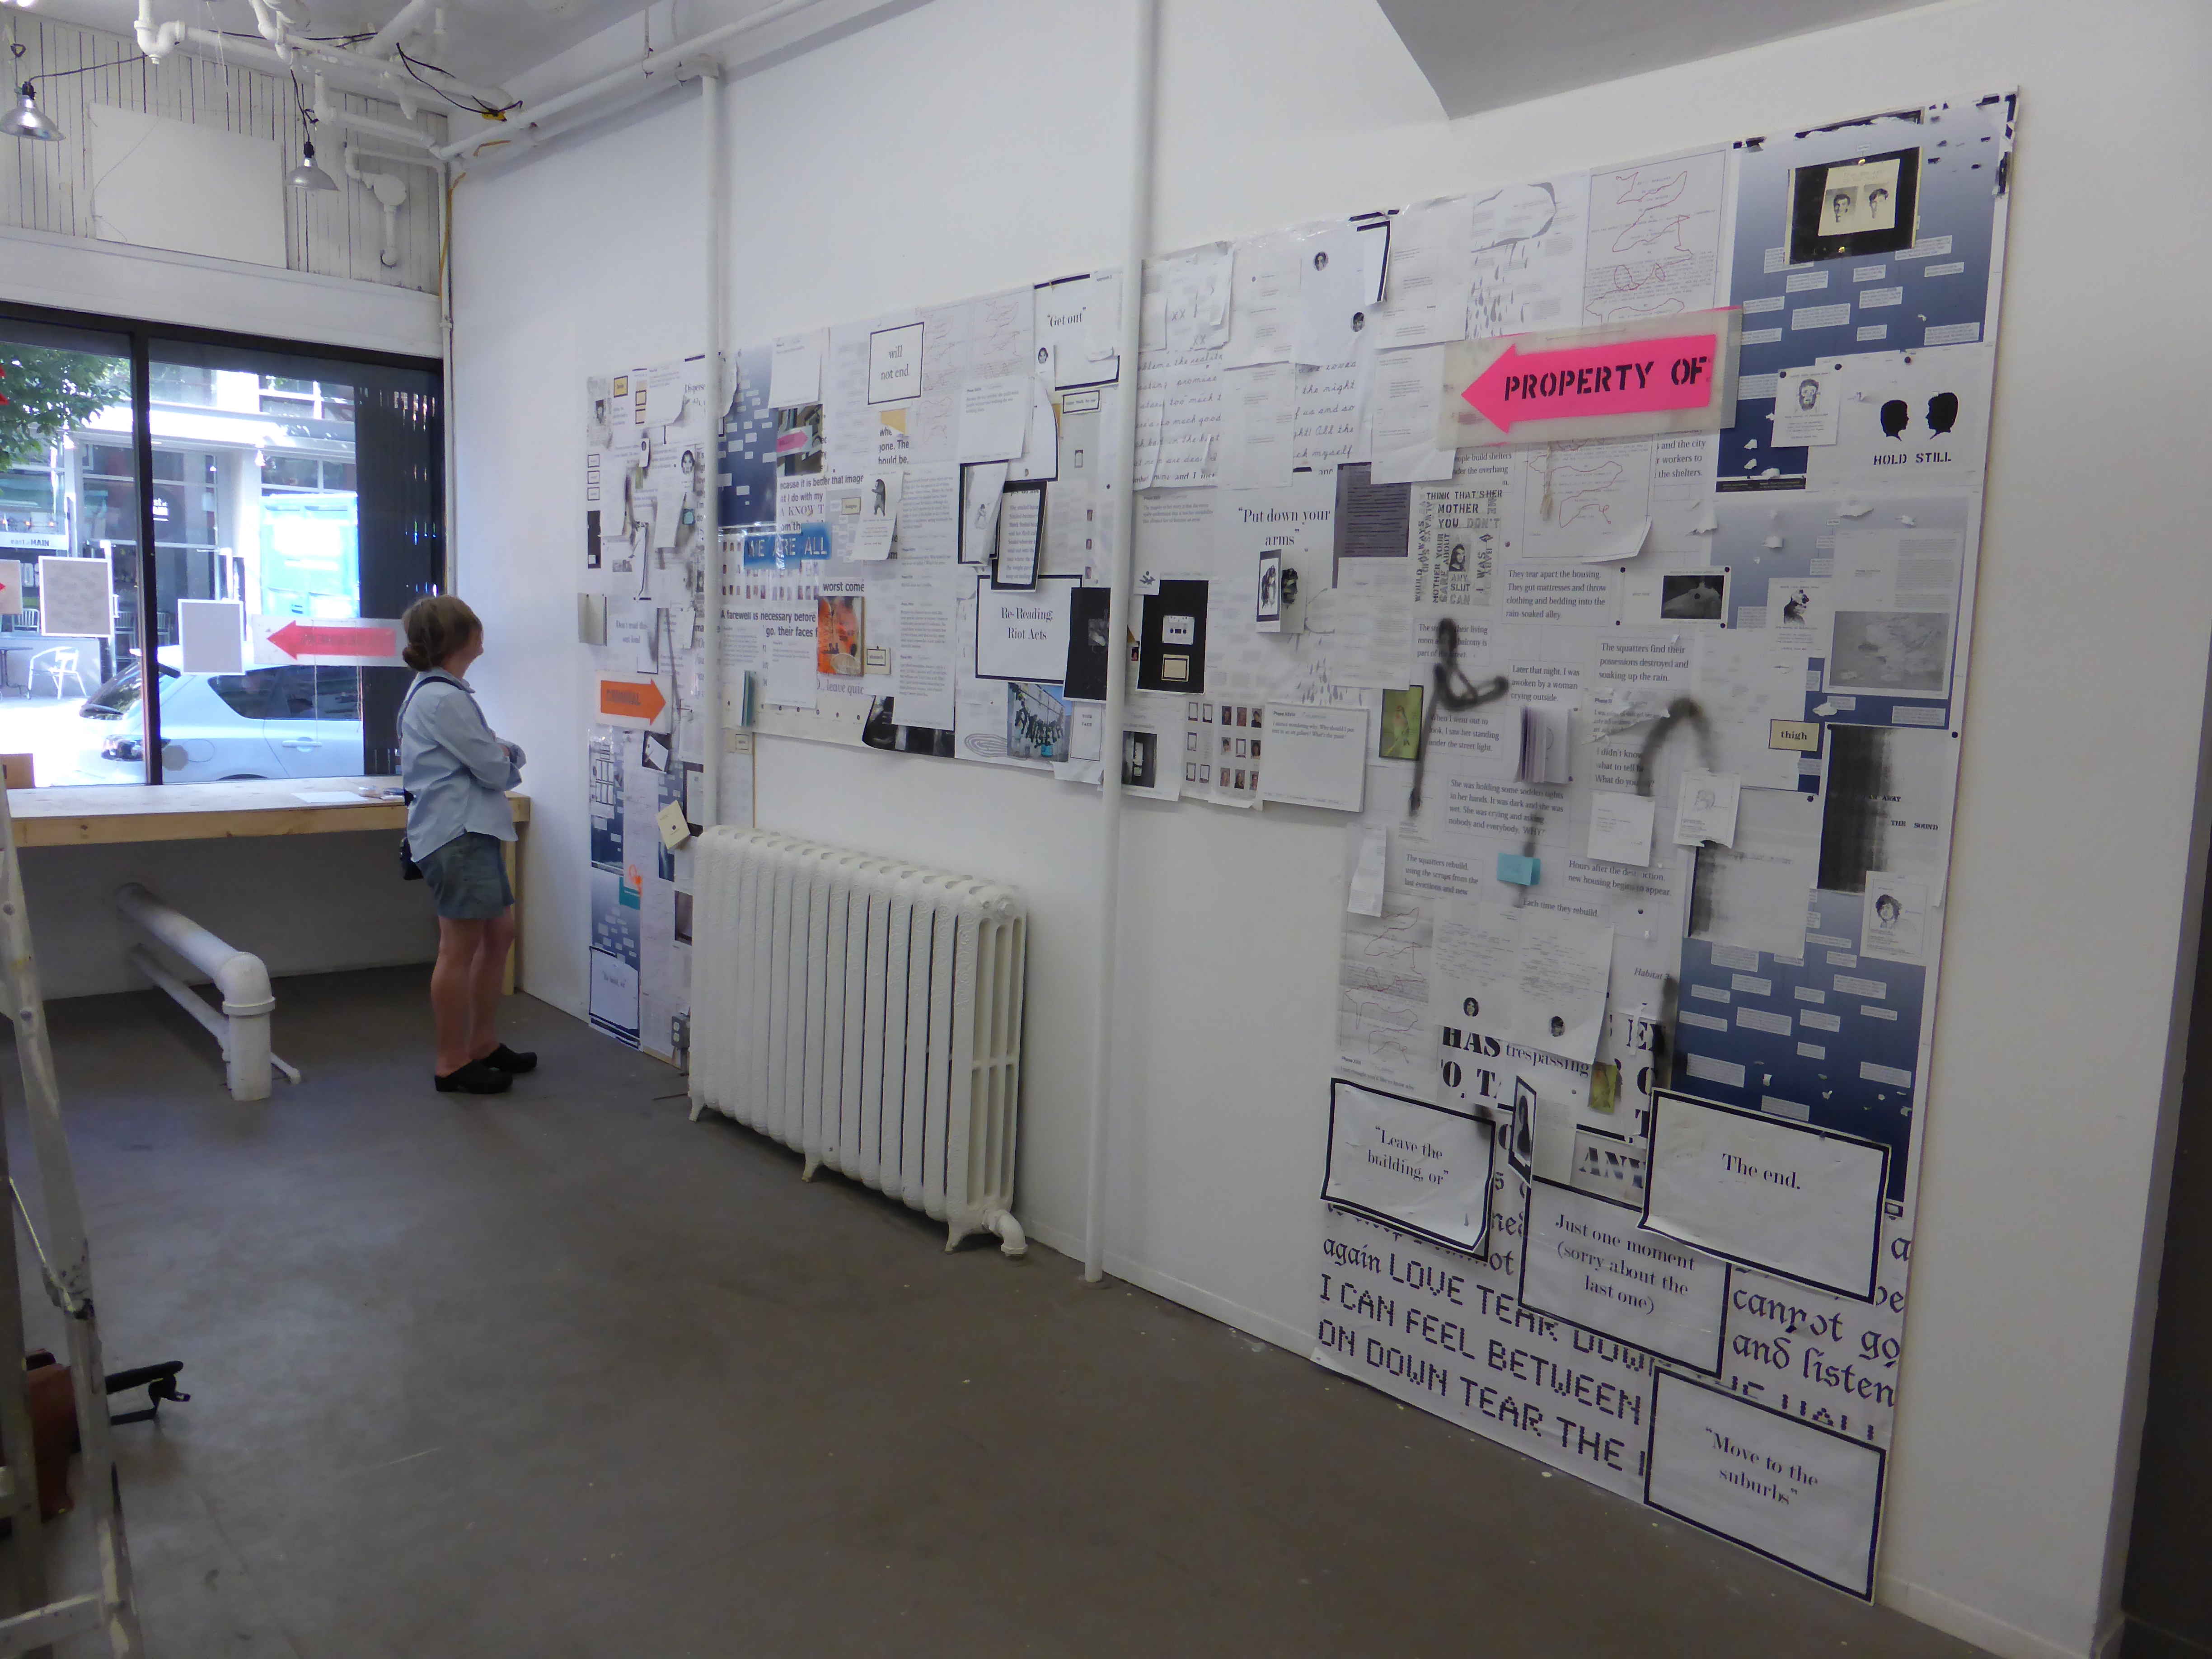 Installation view of Hoarding by leannej and My Name is Scot